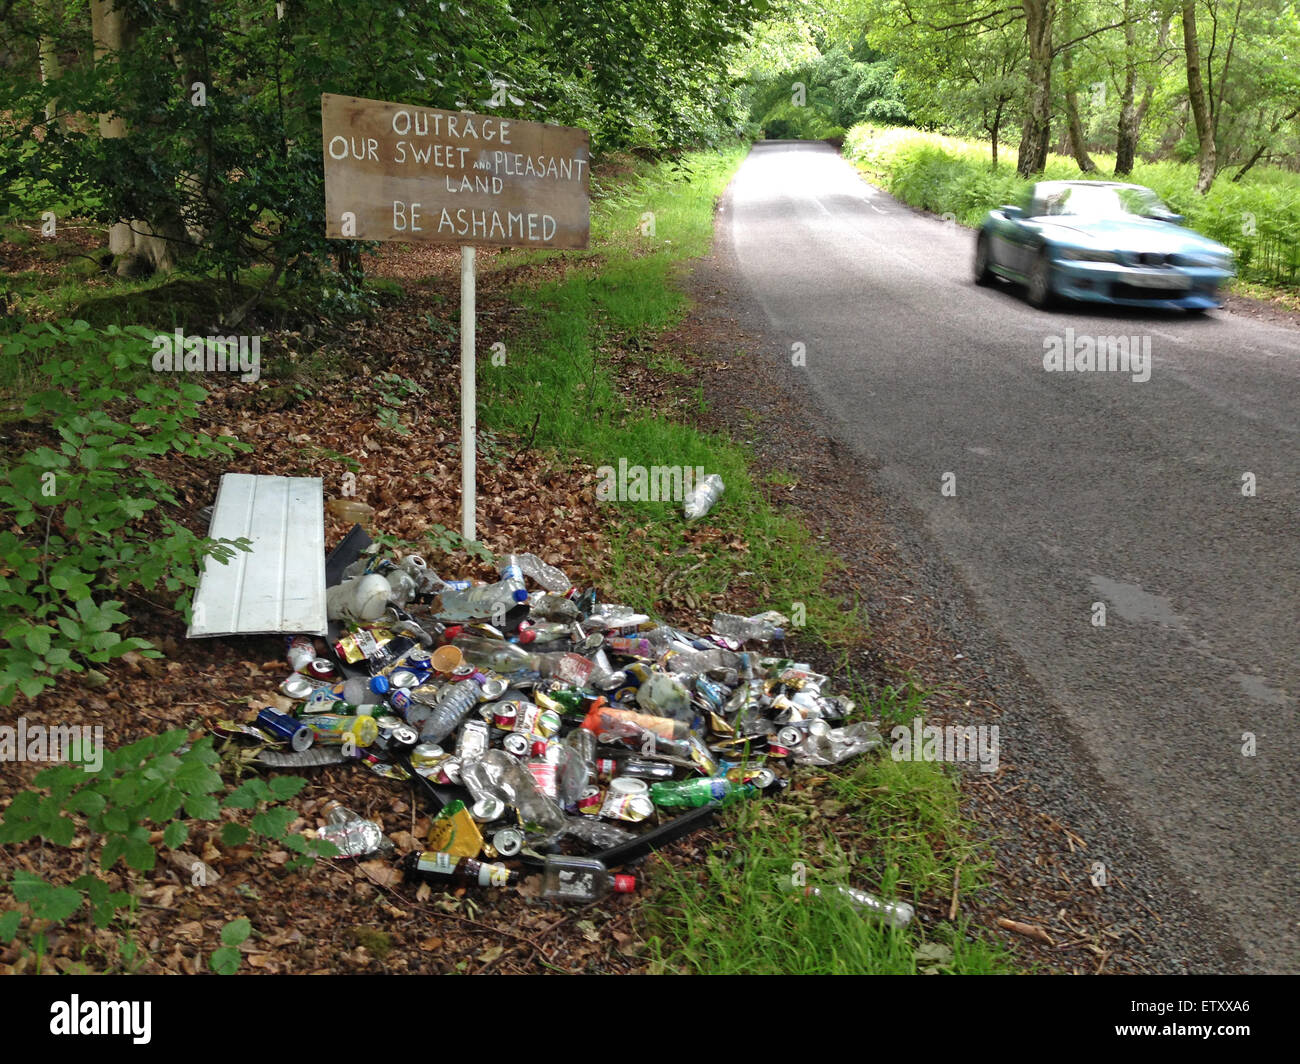 Cannock Chase, Staffordshire, UK. 15th June, 2015. In the countryside around Upper Longdon, Cannock Chase, 'area of outstanding natural beauty' a litter vigilante creates a roadside protest against littering. The mystery person or persons collect rubbish and present it next to a sign reading 'Outrage. Our sweet and pleasant land. Be ashamed.' The rubbish contains mainly alcohol drinks cans and bottles. Credit:  Richard Grange/Alamy Live News Stock Photo